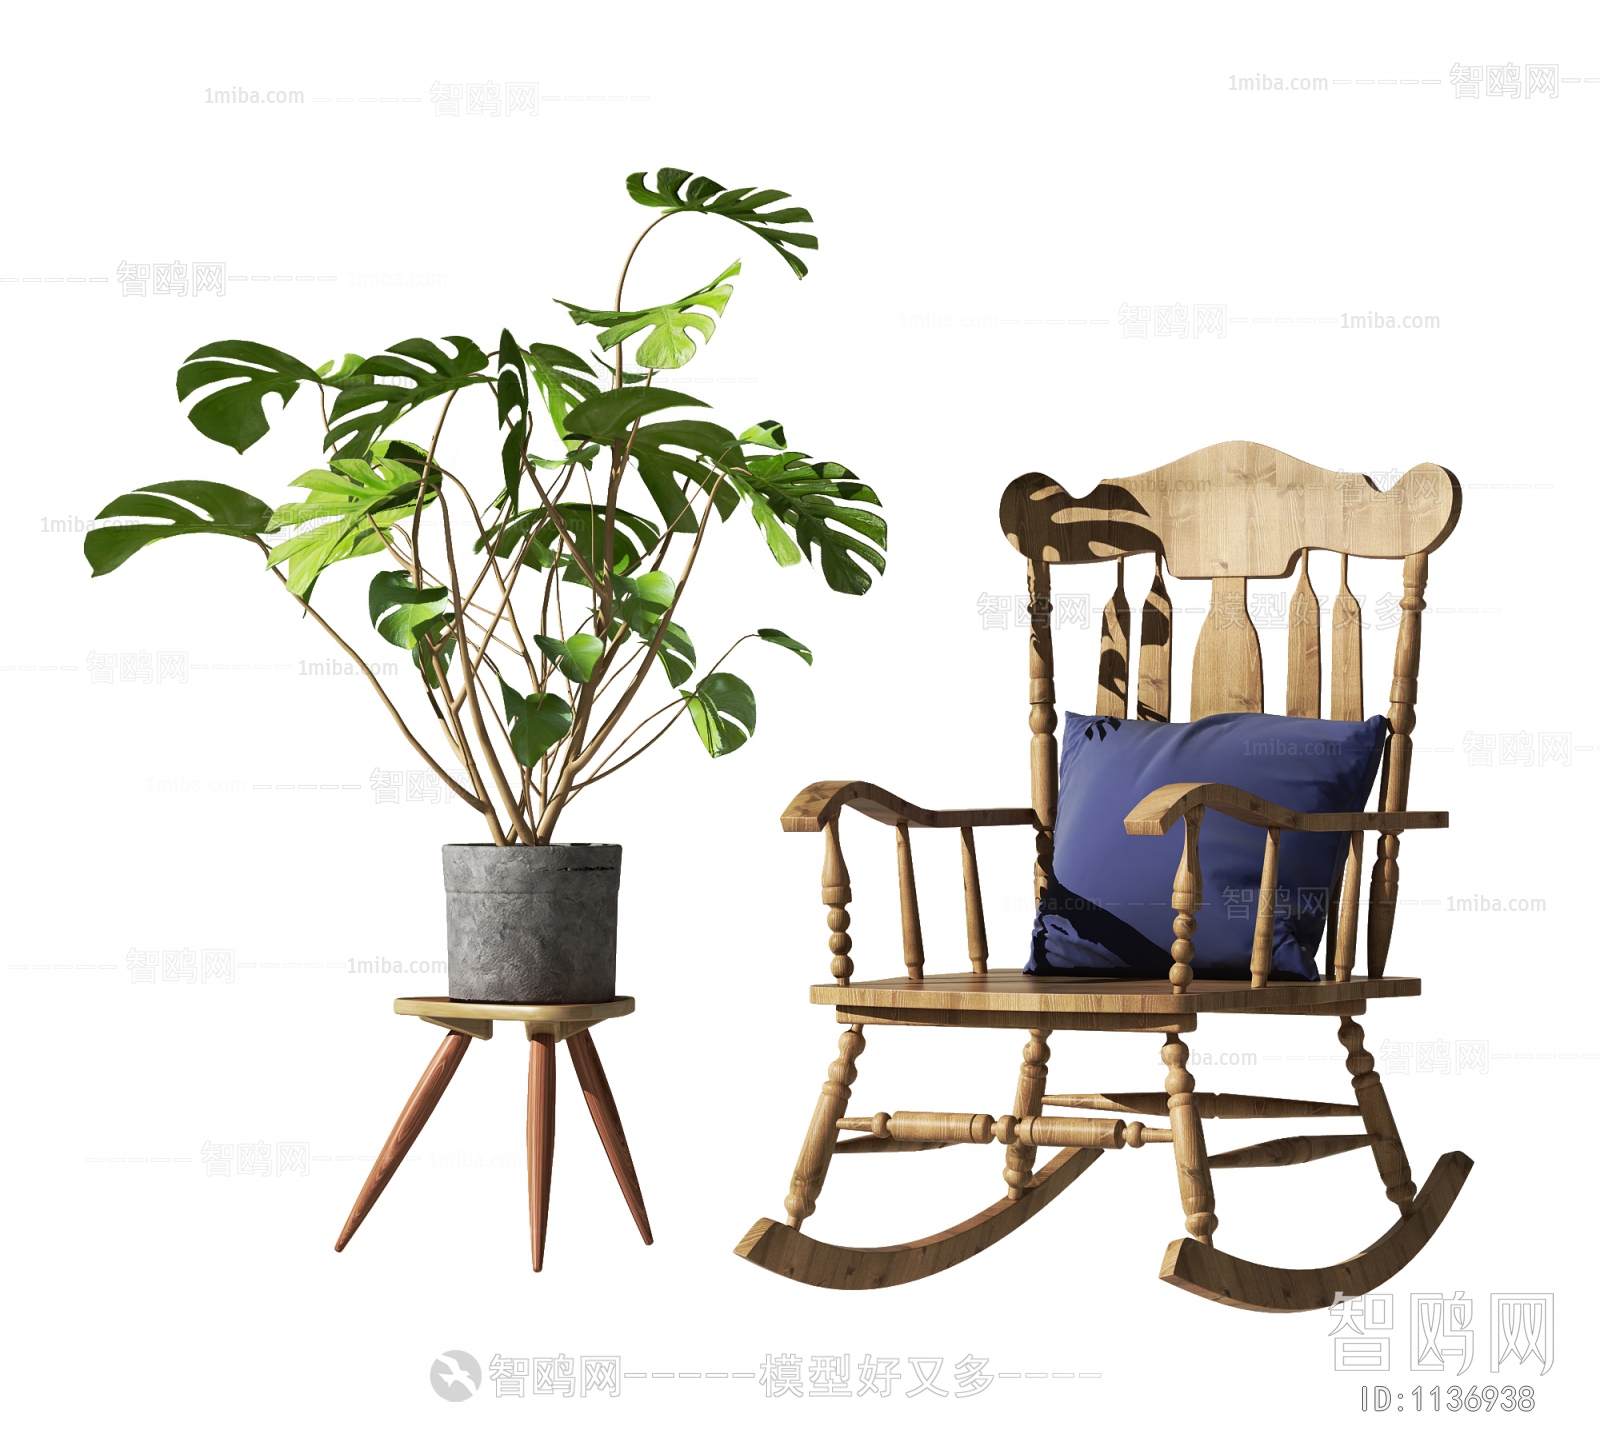 American Style Rocking Chair